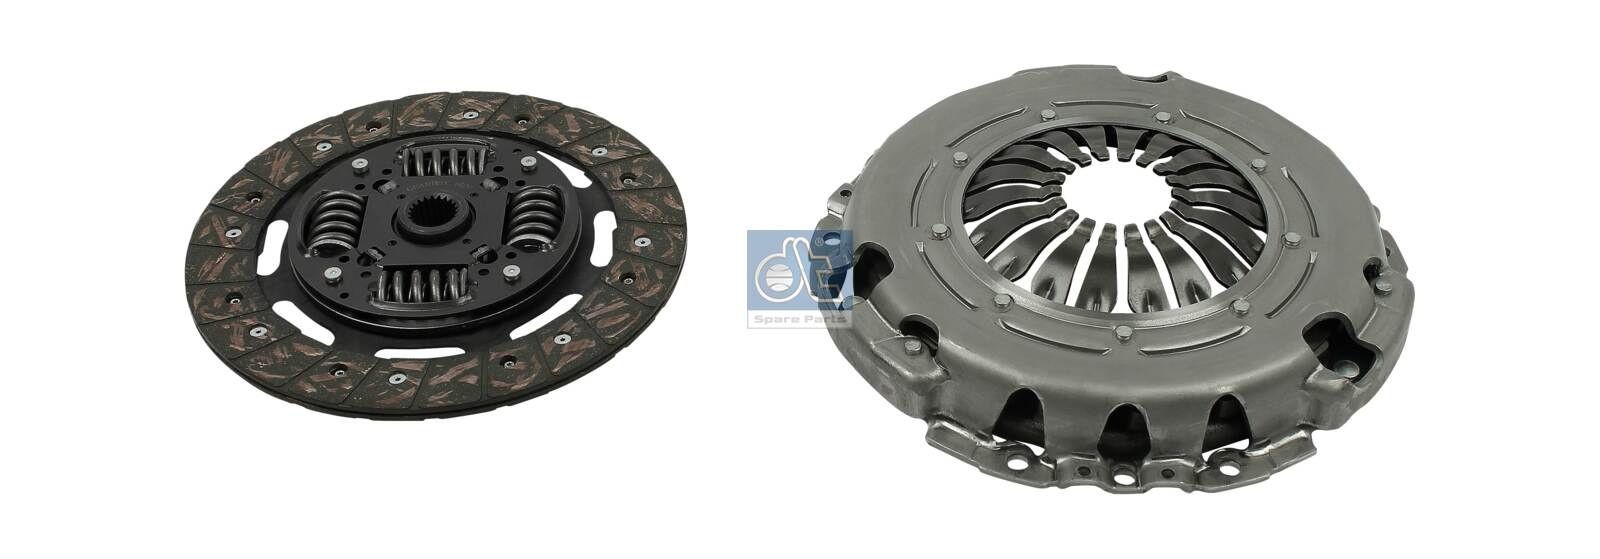 DT Spare Parts 6.93046 Clutch kit RENAULT experience and price